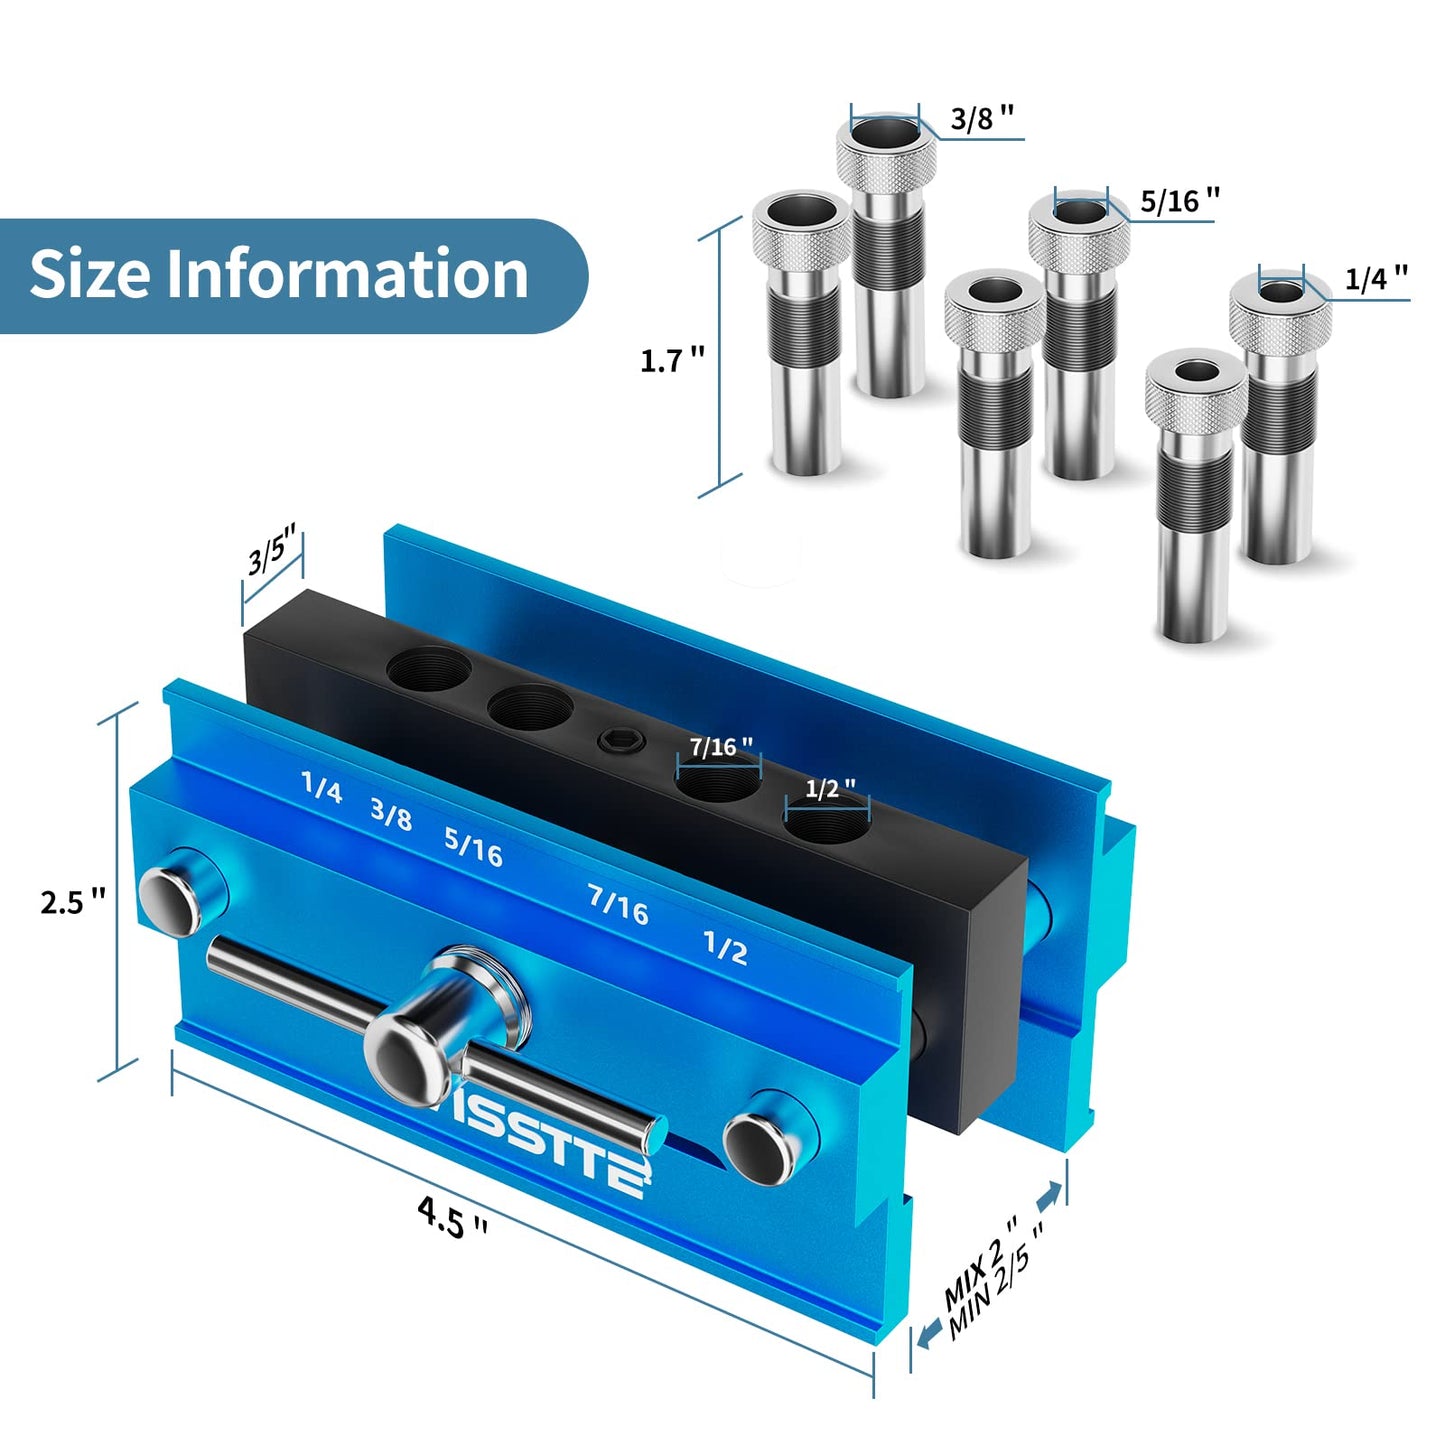 WISSTTE self centering dowel jig For Straight Holes Biscuit Joiner Set,doweling jig self centering kit With 6 Drill Guide Bushings,dowling jig for